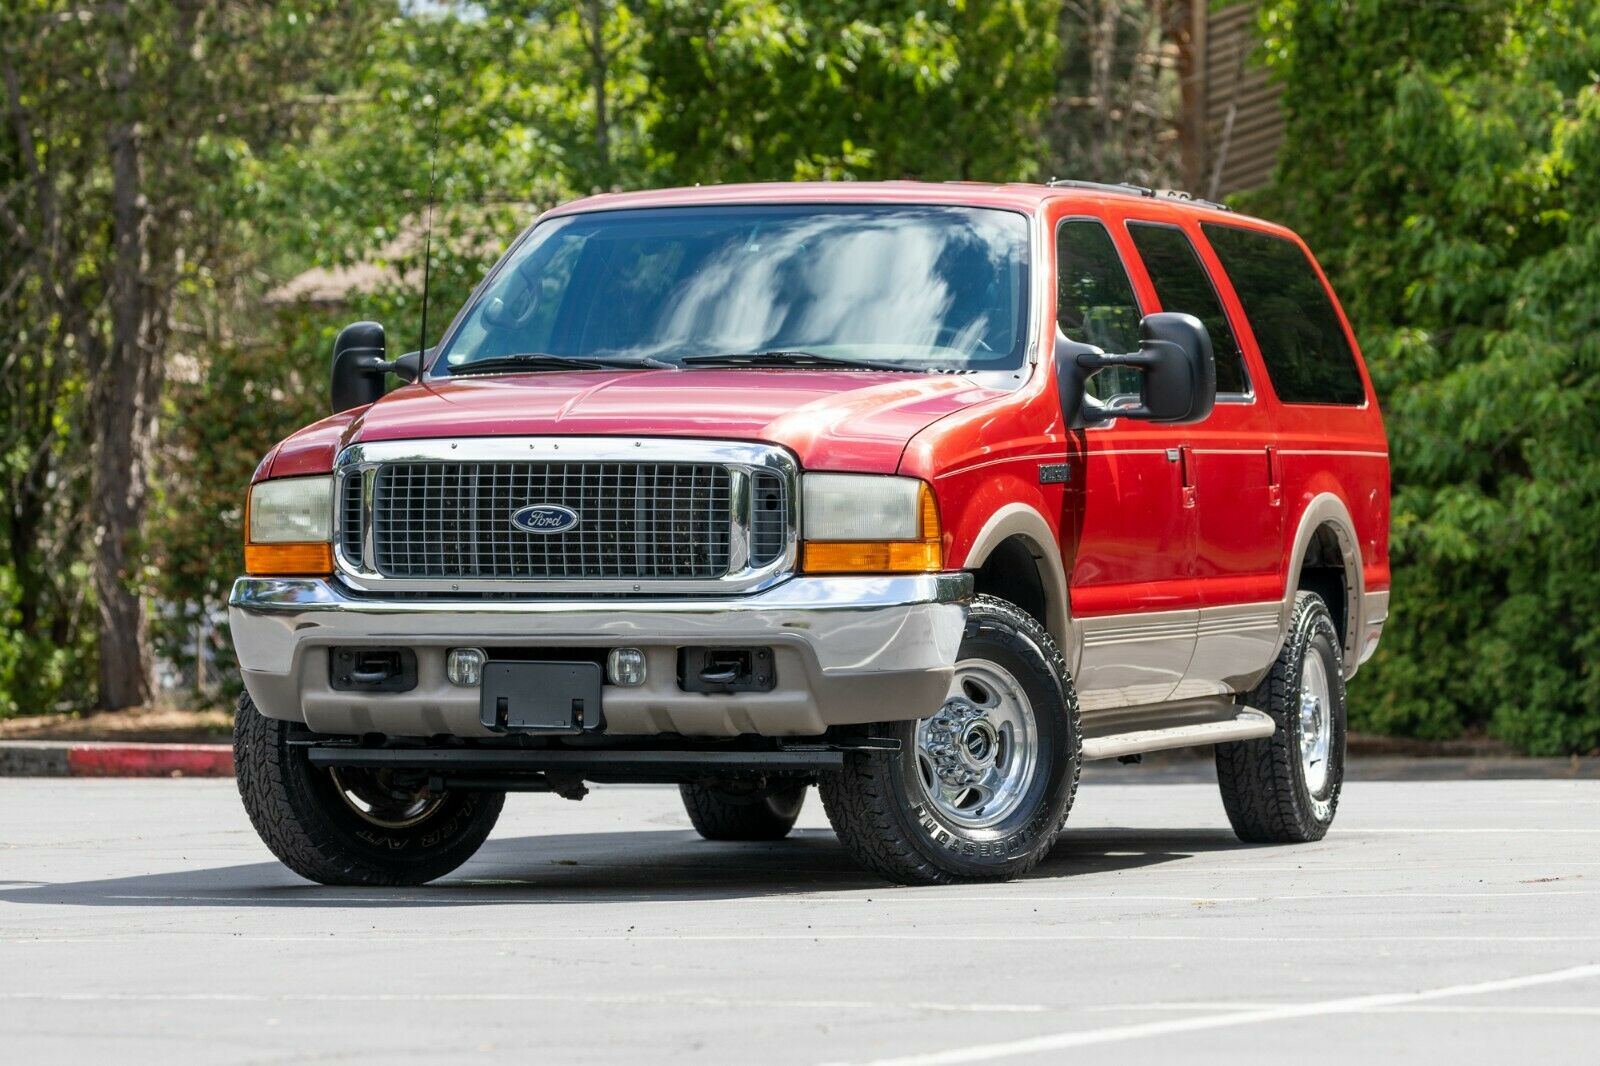 2001 Ford Excursion  2001 Ford Excursion Limited 4 Door Wagon Suv 4x4 7.3l V8 Diesel 95.245 Miles